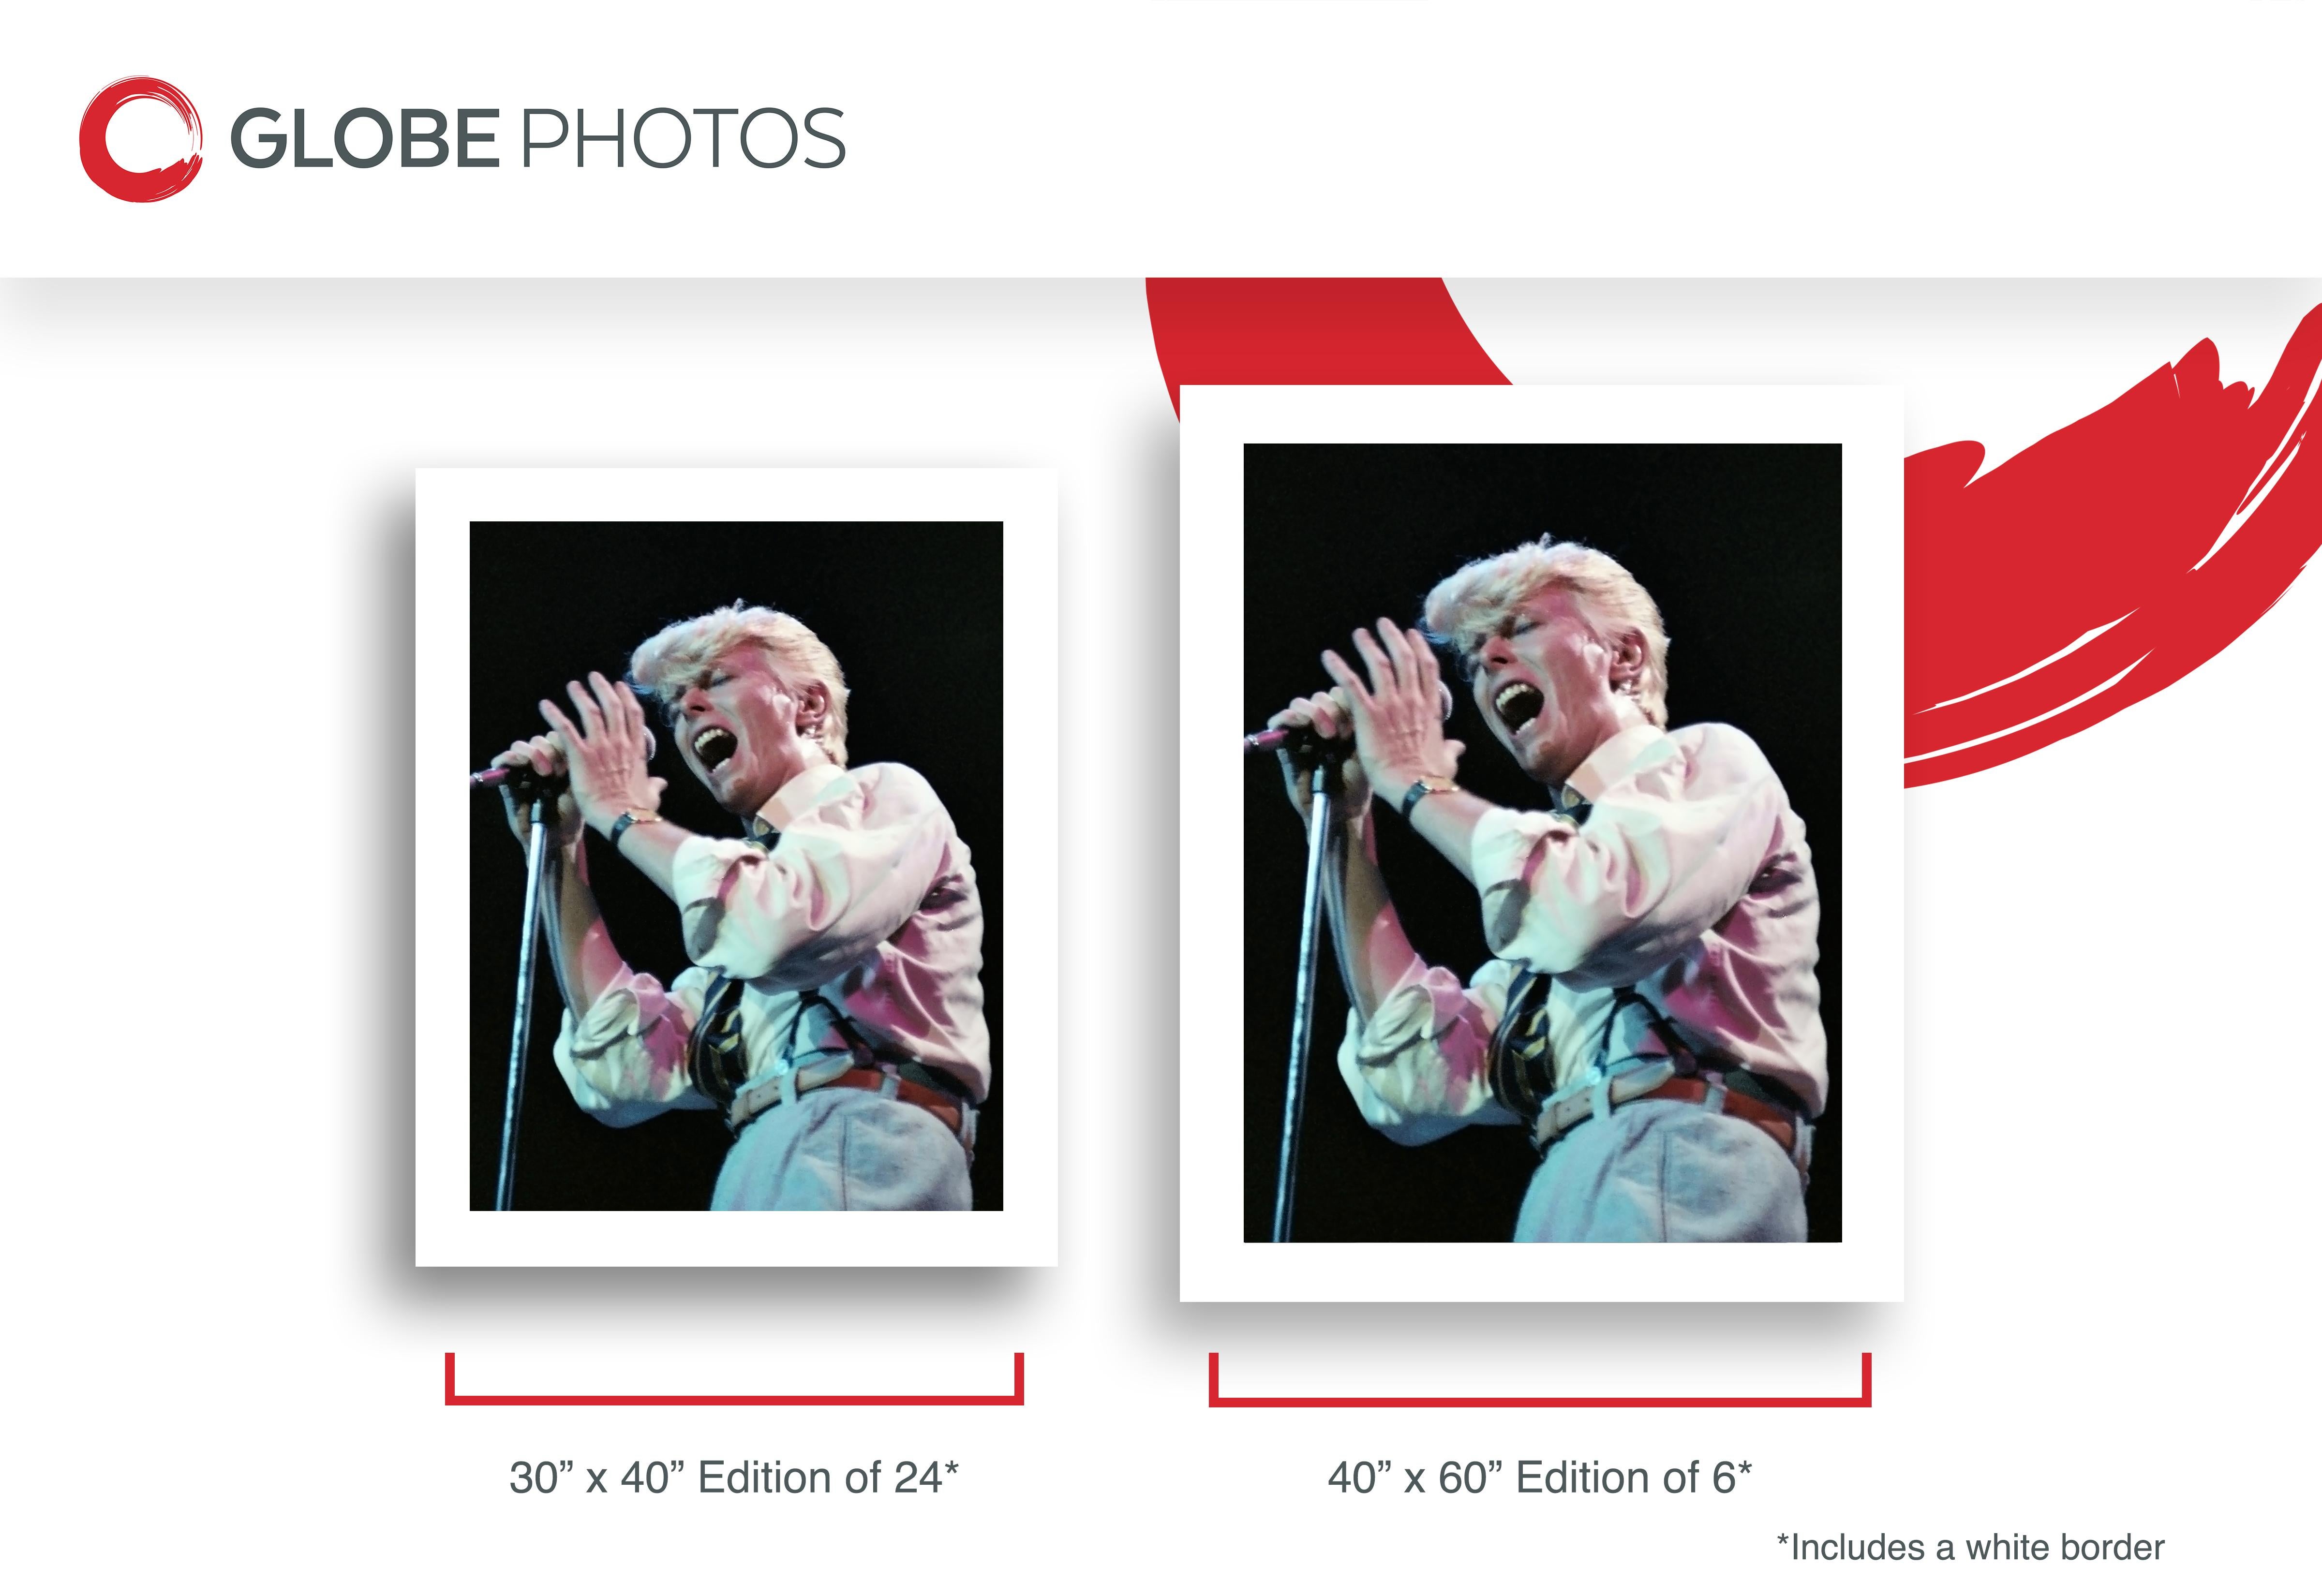 This color action portrait features singer and musician David Bowie on stage during his 